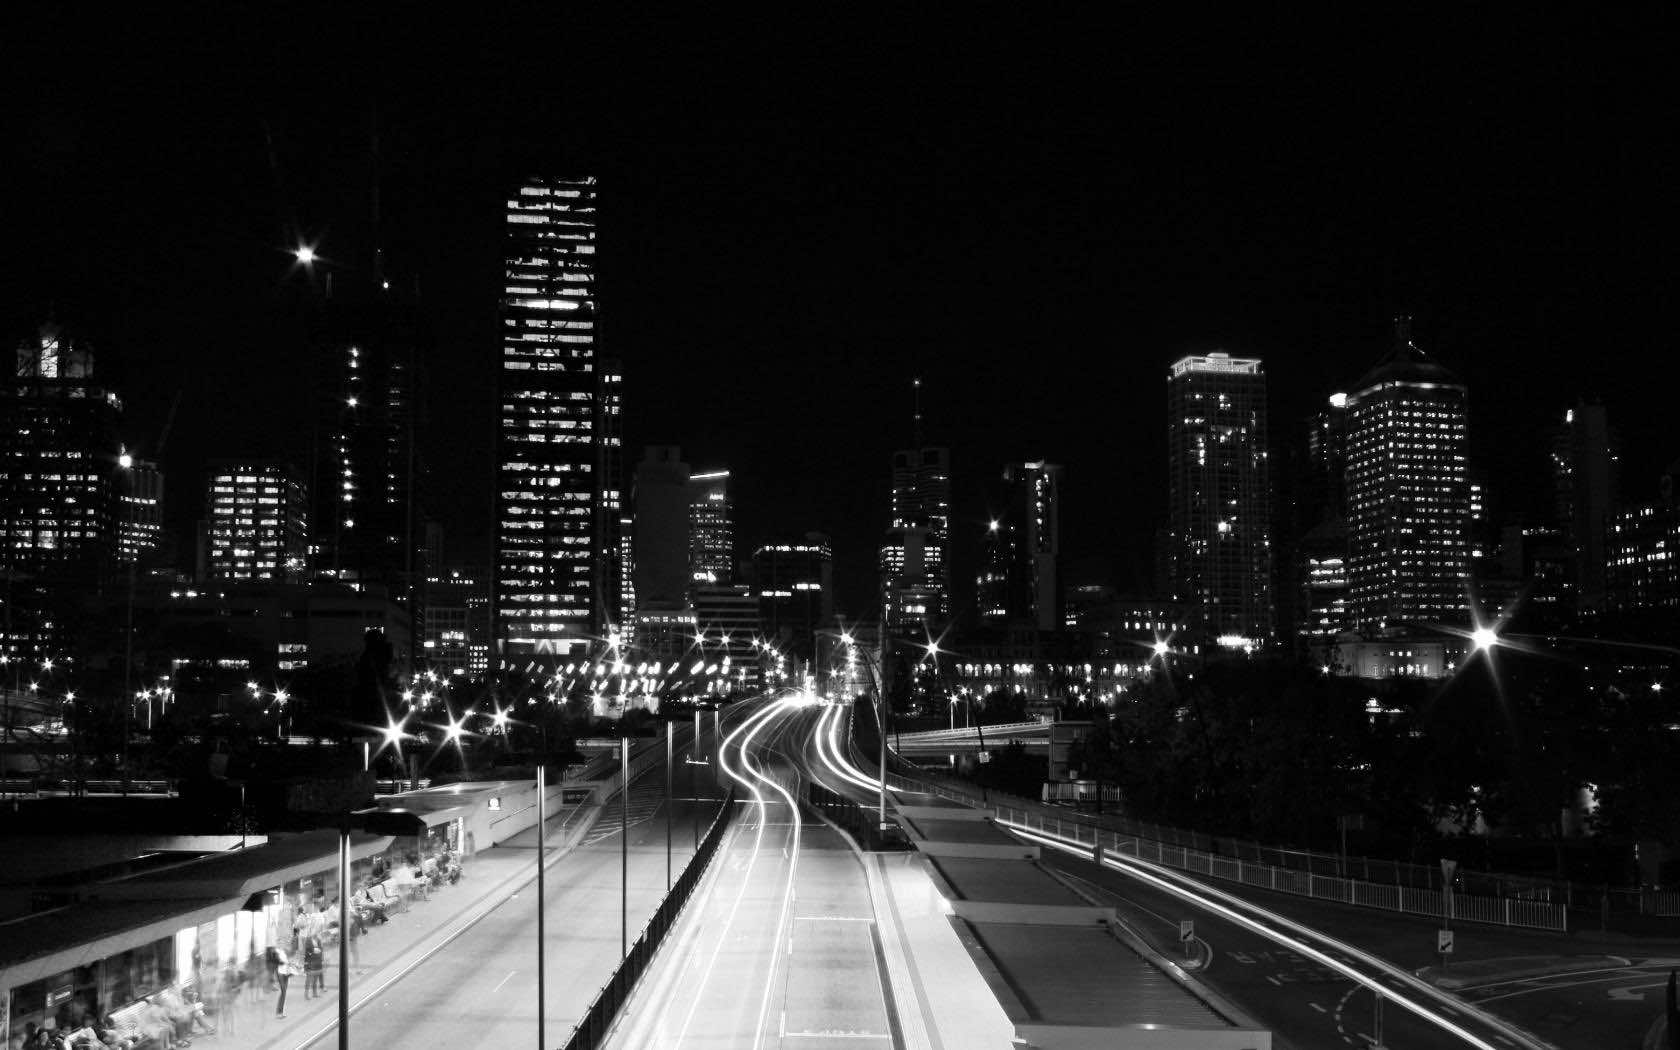 A black and white photo of city lights - City